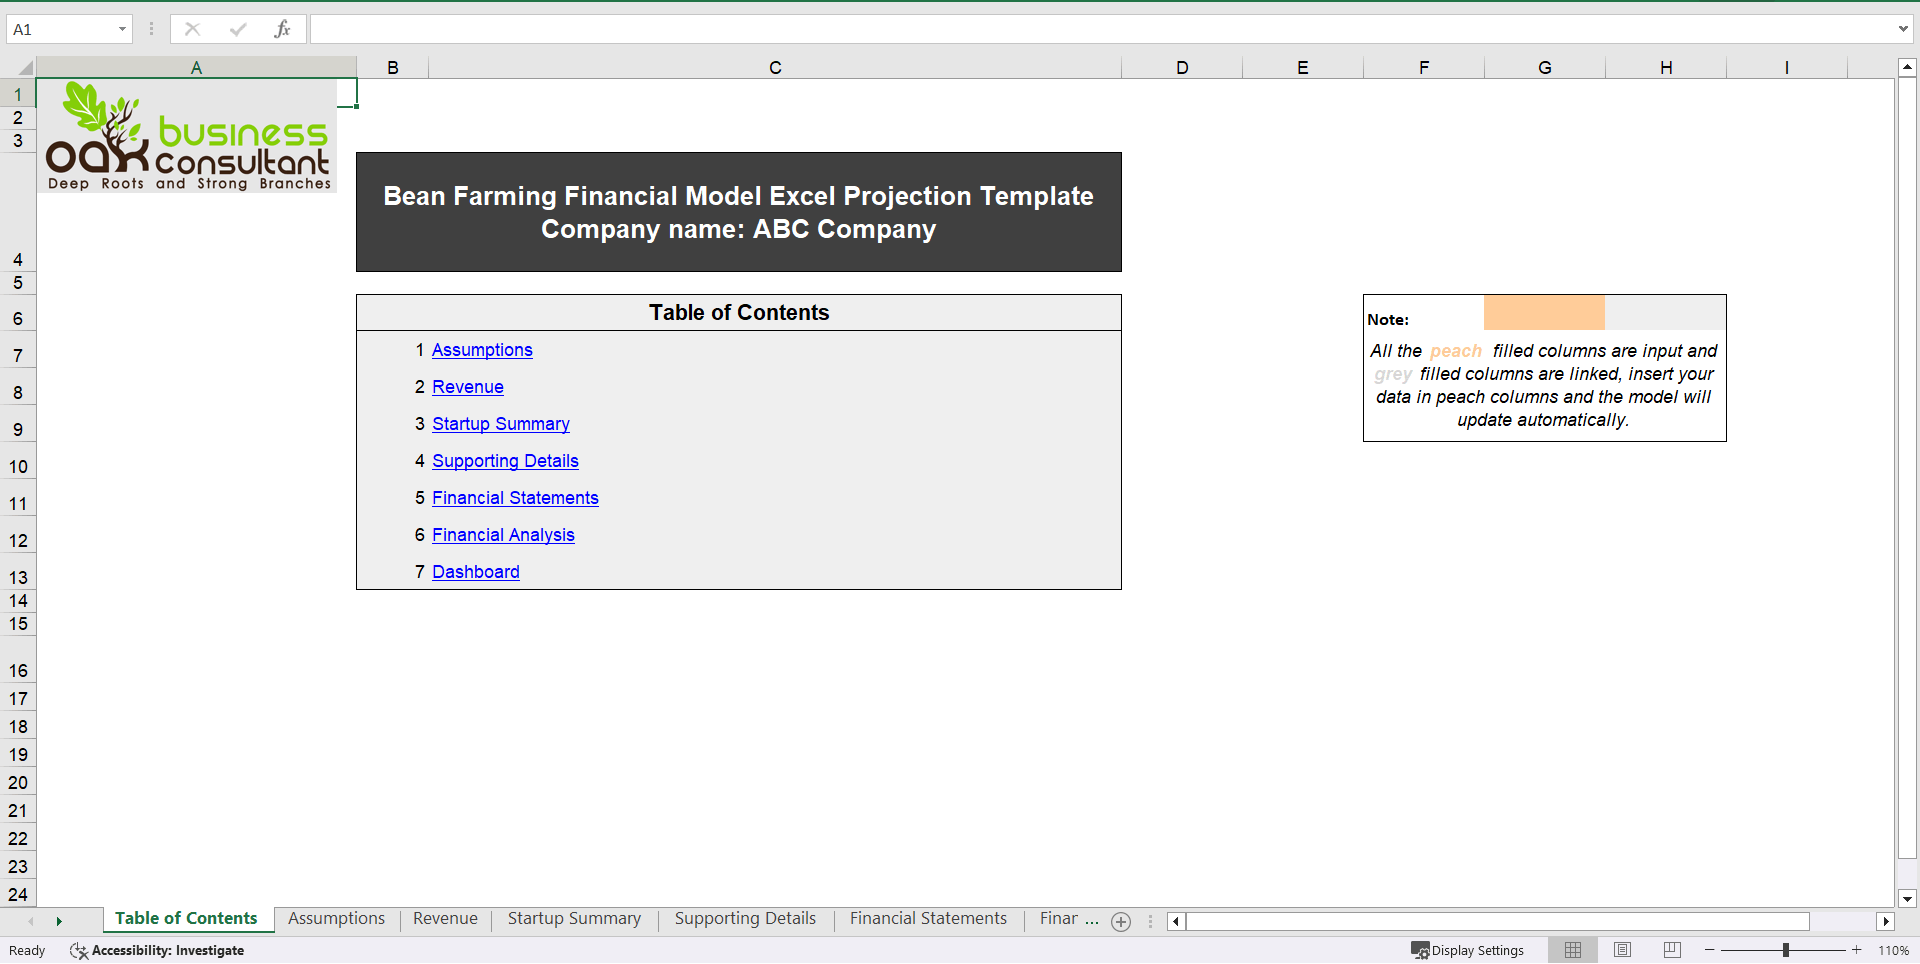 Bean Farming Financial Model Excel Projection Template (Excel template (XLSX)) Preview Image